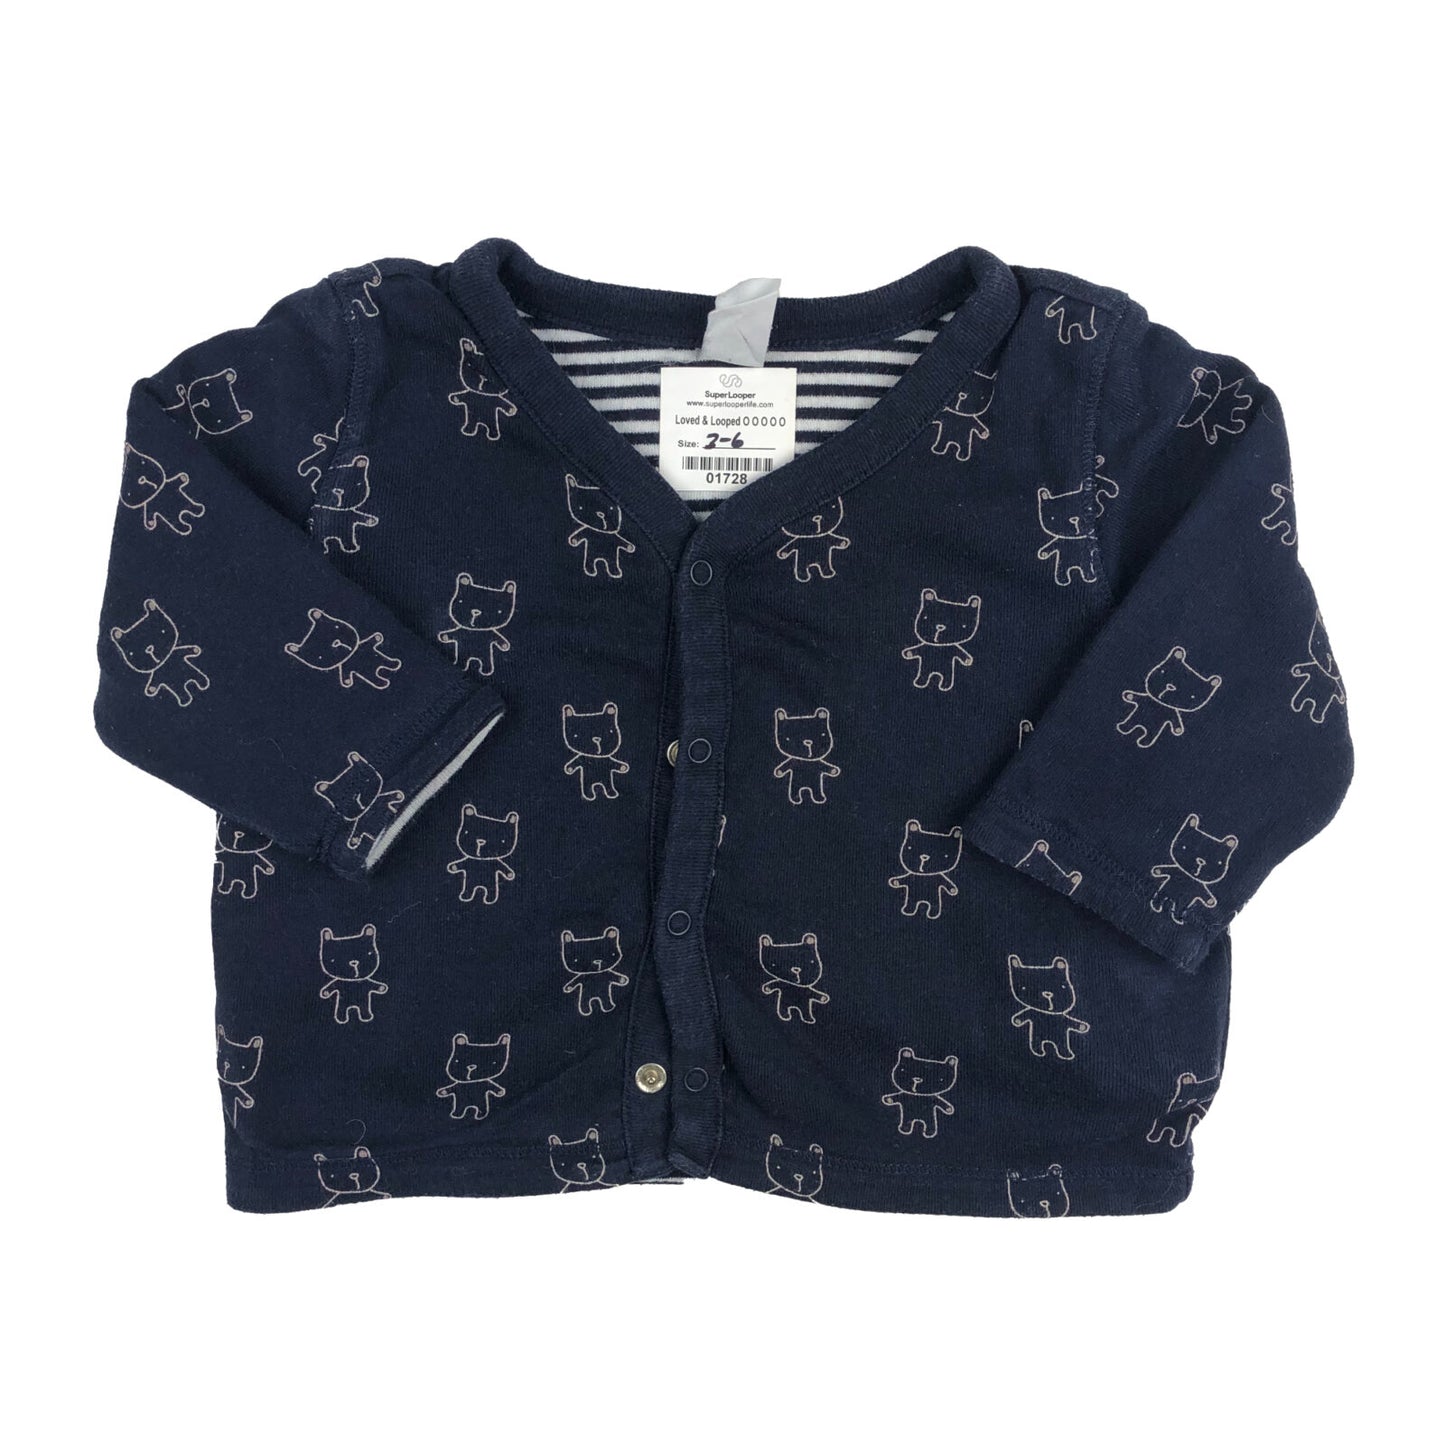 Cotton lined teddy print jacket snap front fasten